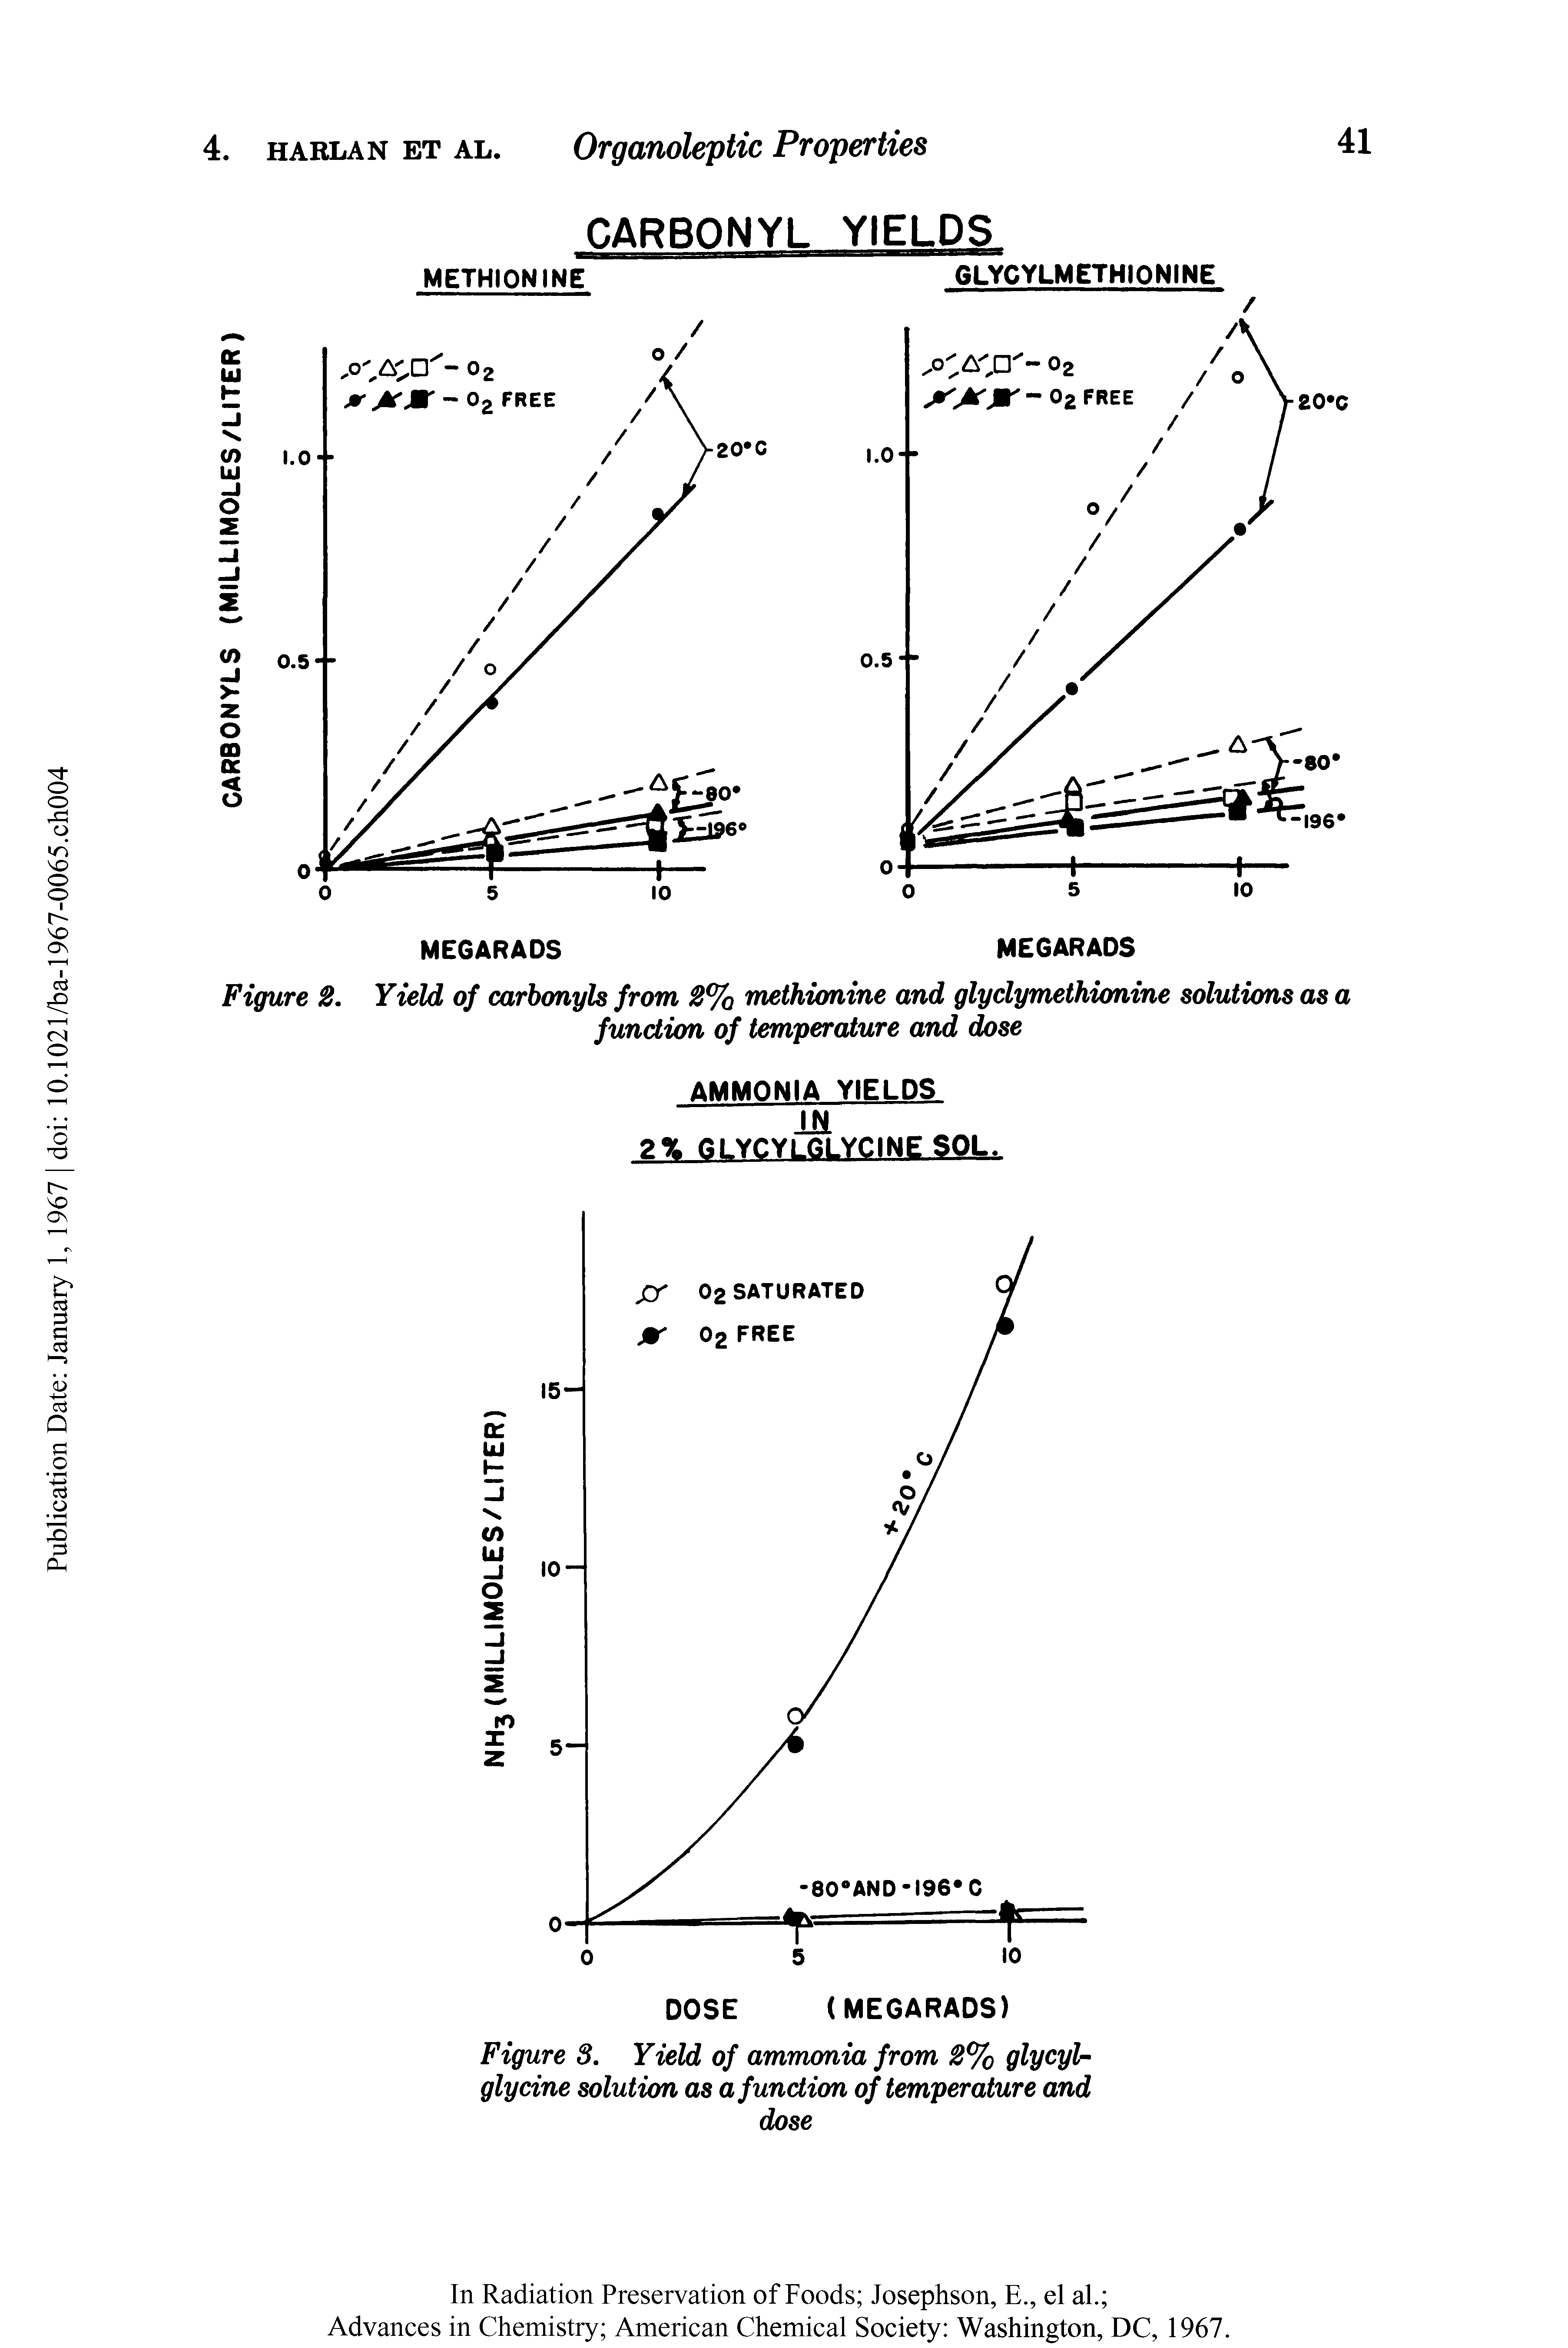 Figure 3. Yield of ammonia from 2% glycyl-glycine solution as a function of temperature and dose...